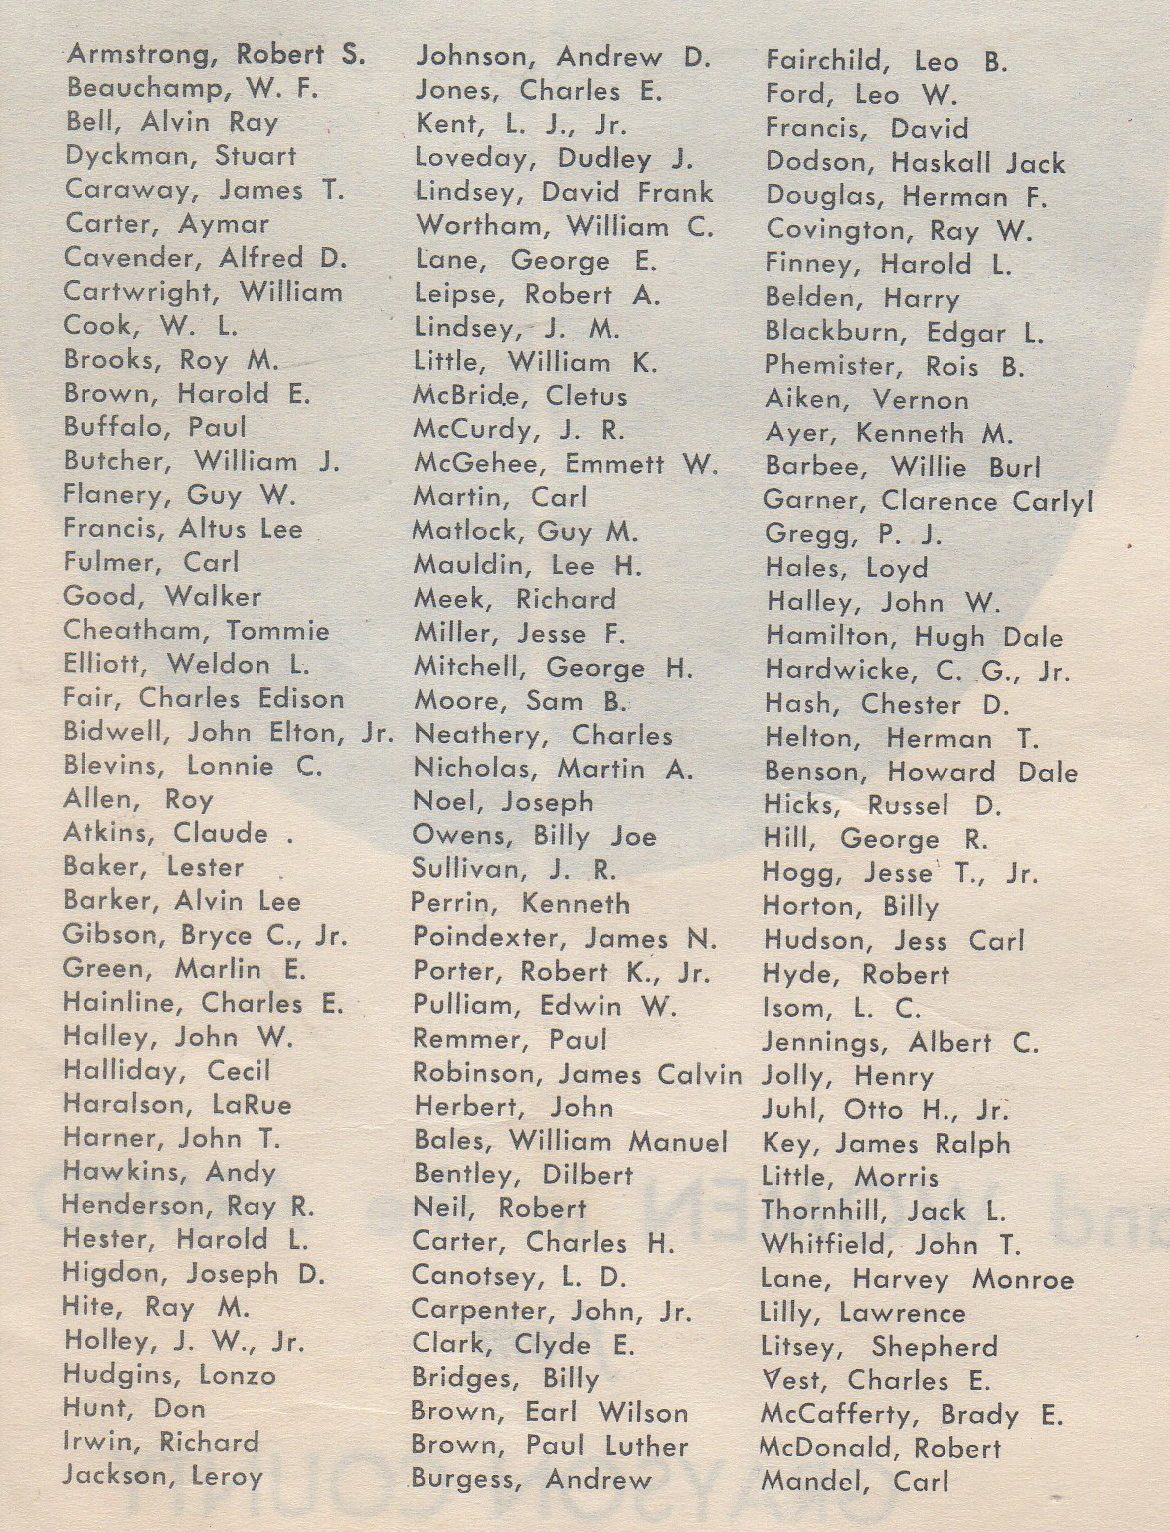 Men and women in the Armed Forces from Grayson County Texas Killed in Action